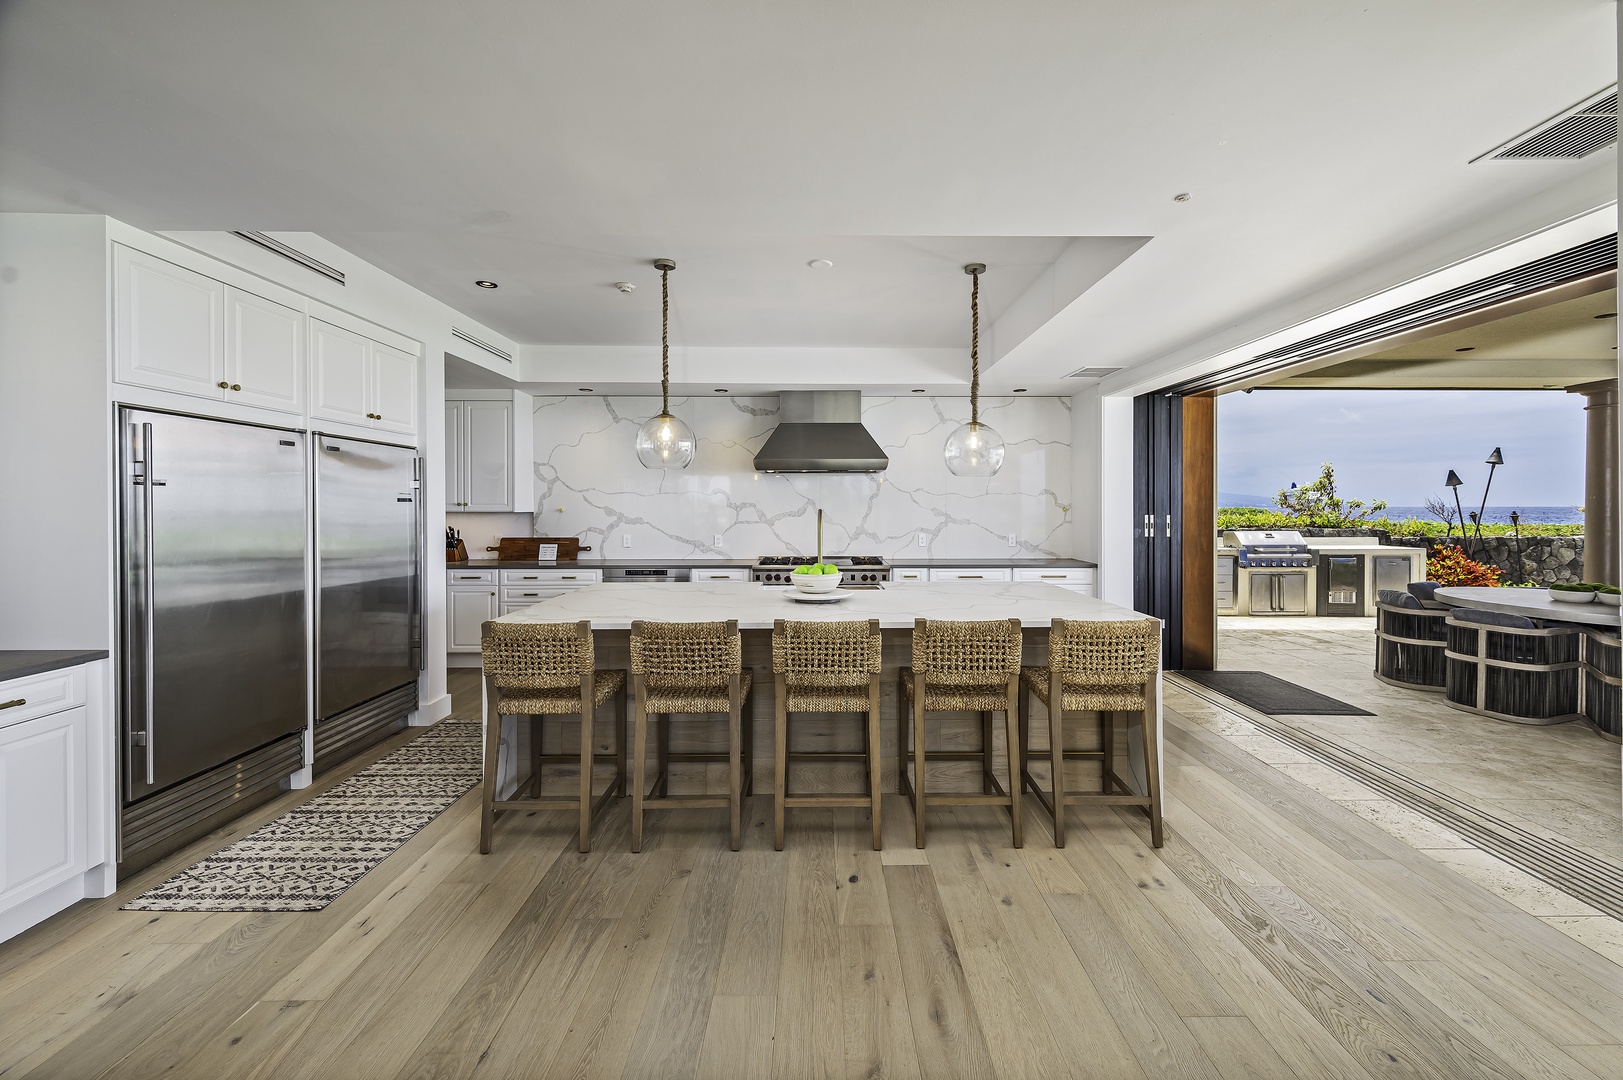 Kailua Kona Vacation Rentals, Alohi Kai Estate • - Wide open kitchen with all high end quartz material and top of the line appliances from Wolf and Sub zero with huge entertaining island and perfectly complimented by Nautical designed rattan bar chairs and rope wrapped pendant lights